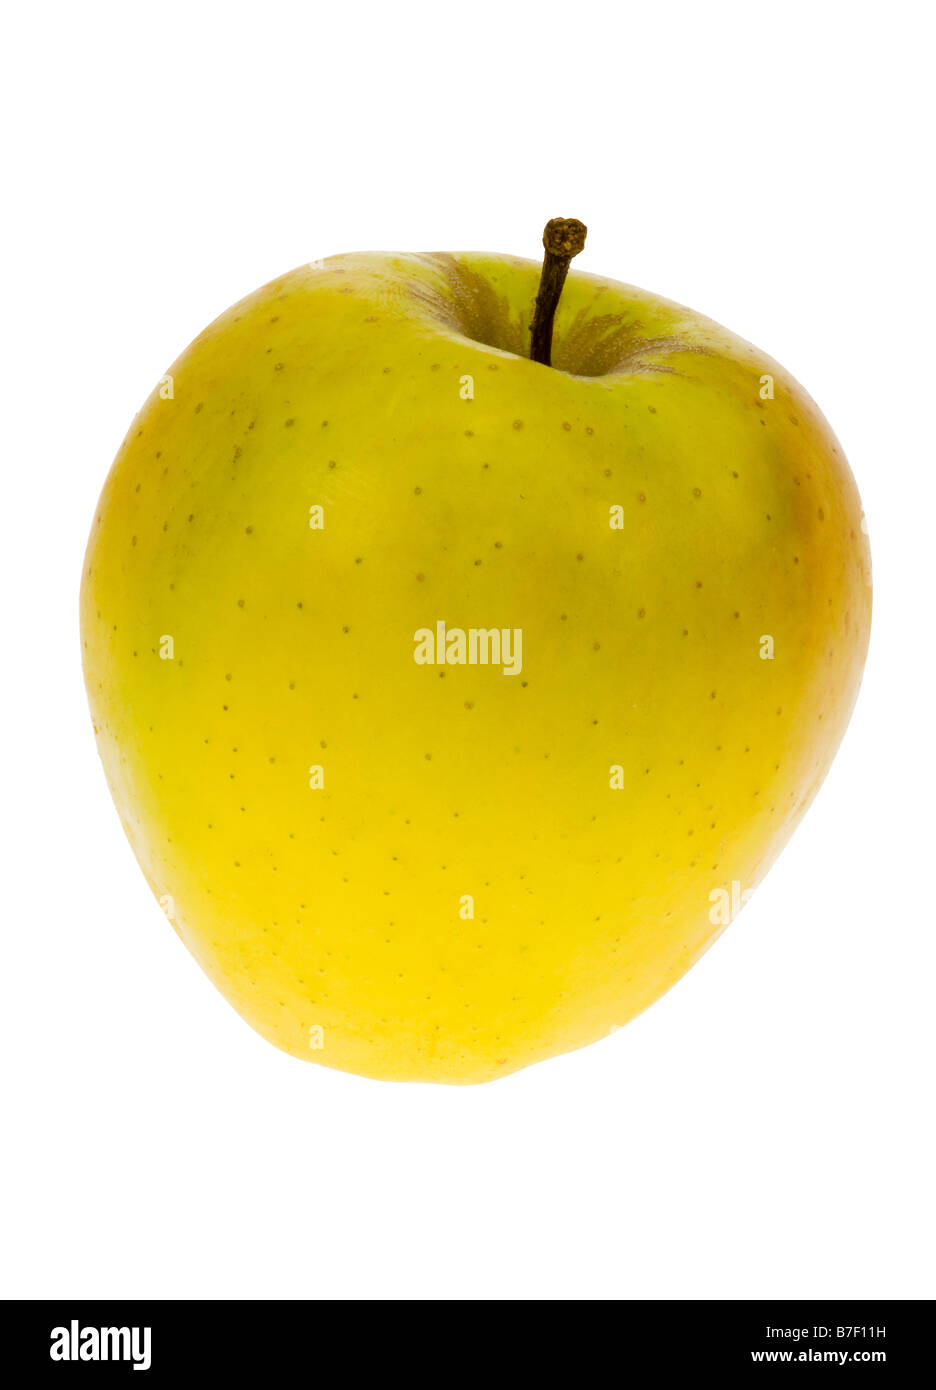 fresh yellow golden delicious apple isolated on a white background Stock Photo